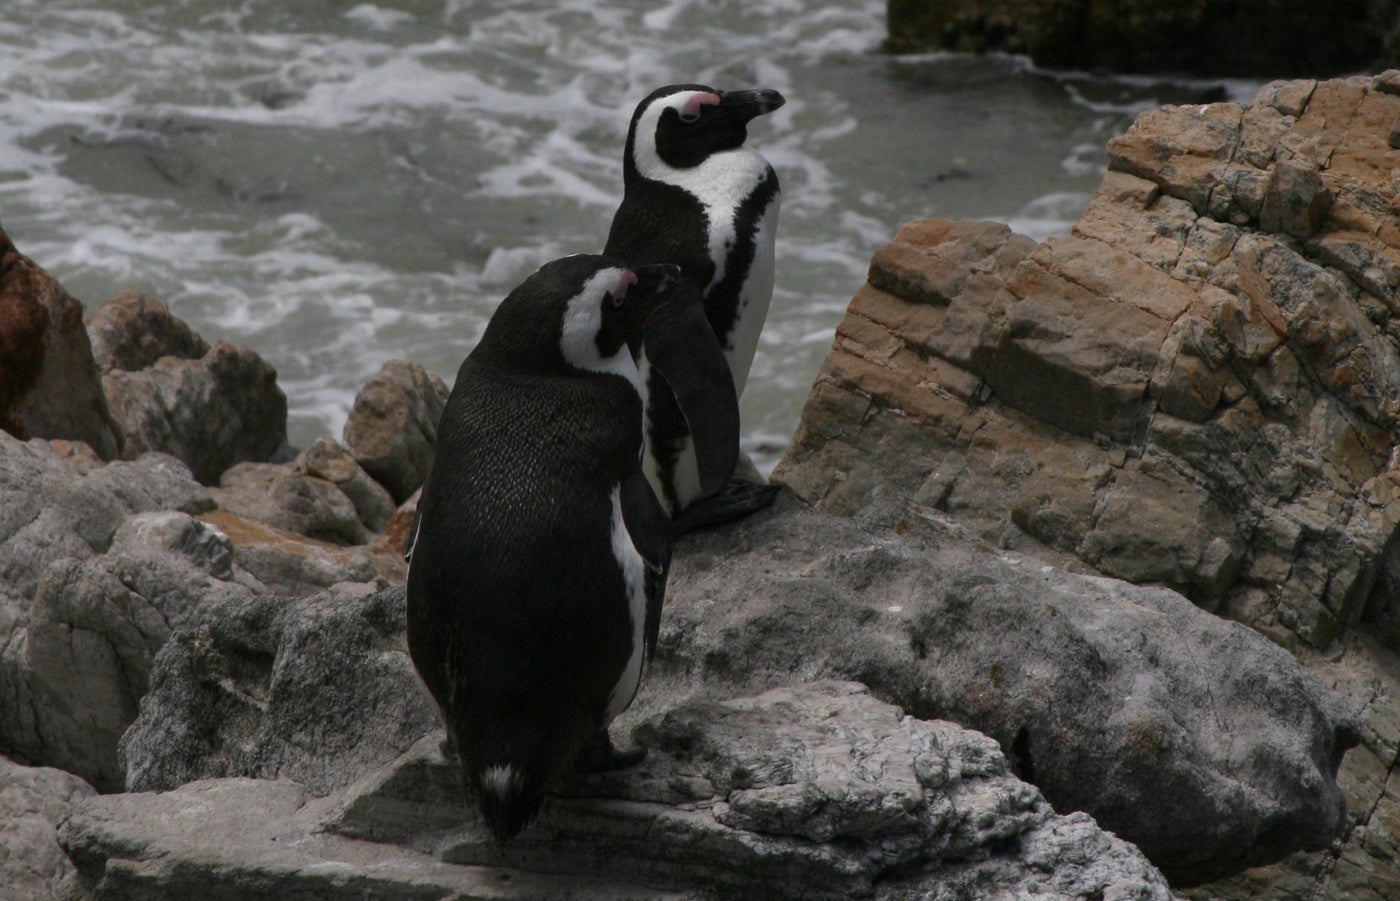 Two African penguins in South Africa